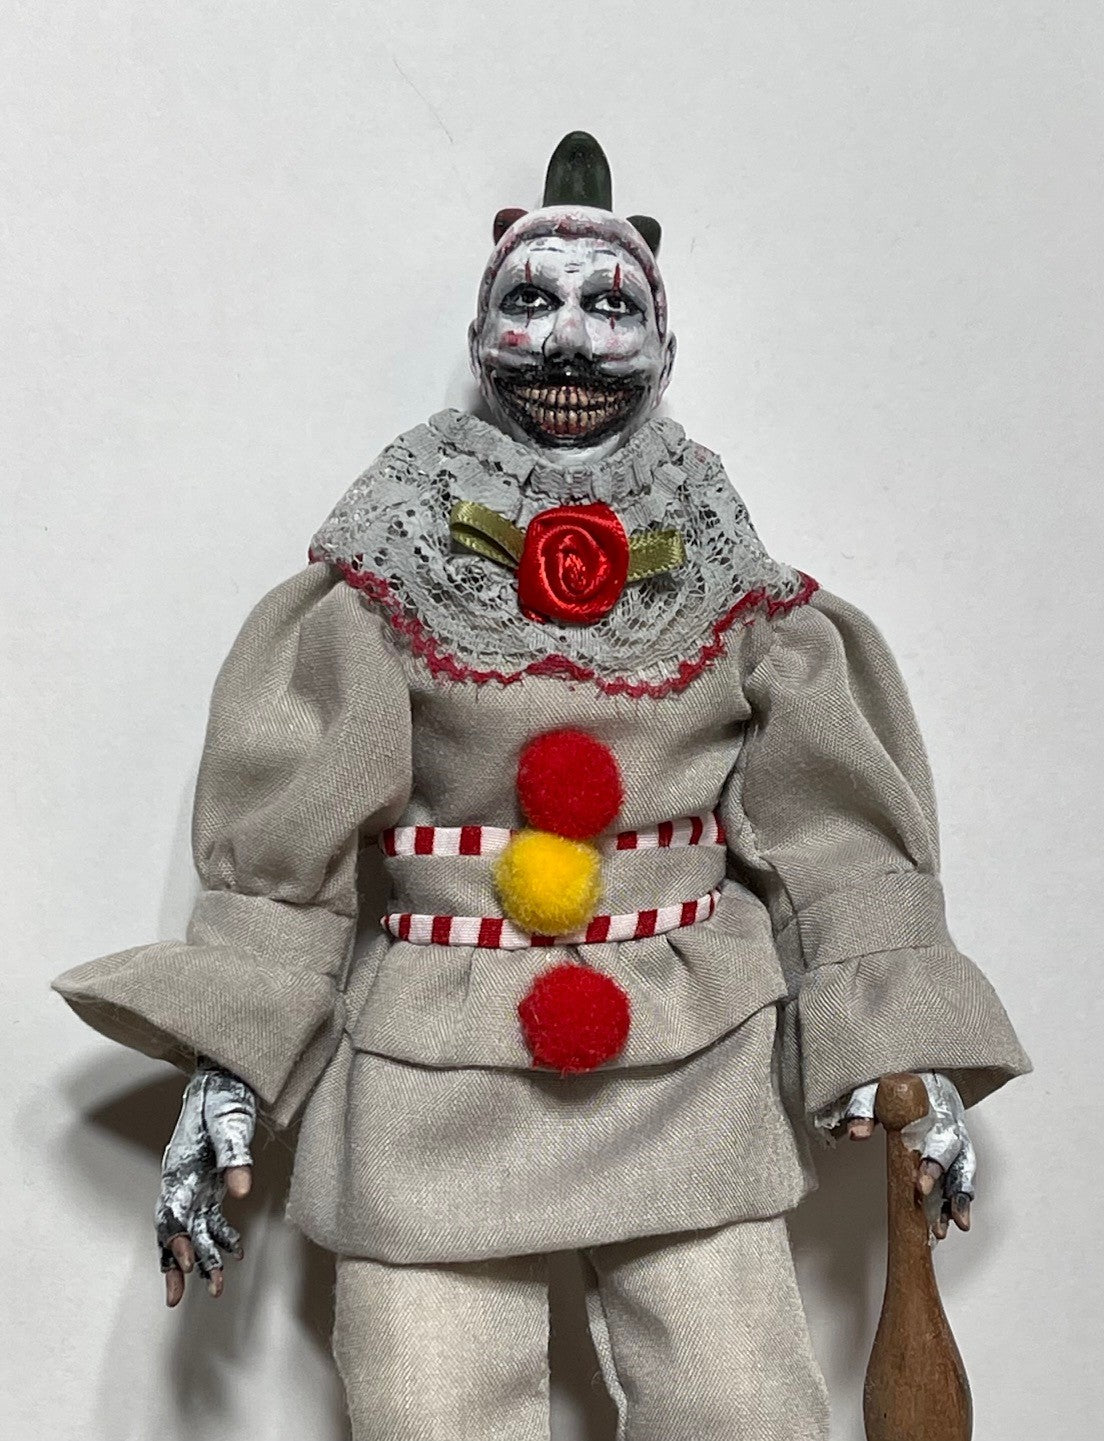 Brentz Dolz American Horror Story - Twisty the Clown 8" Action Figure